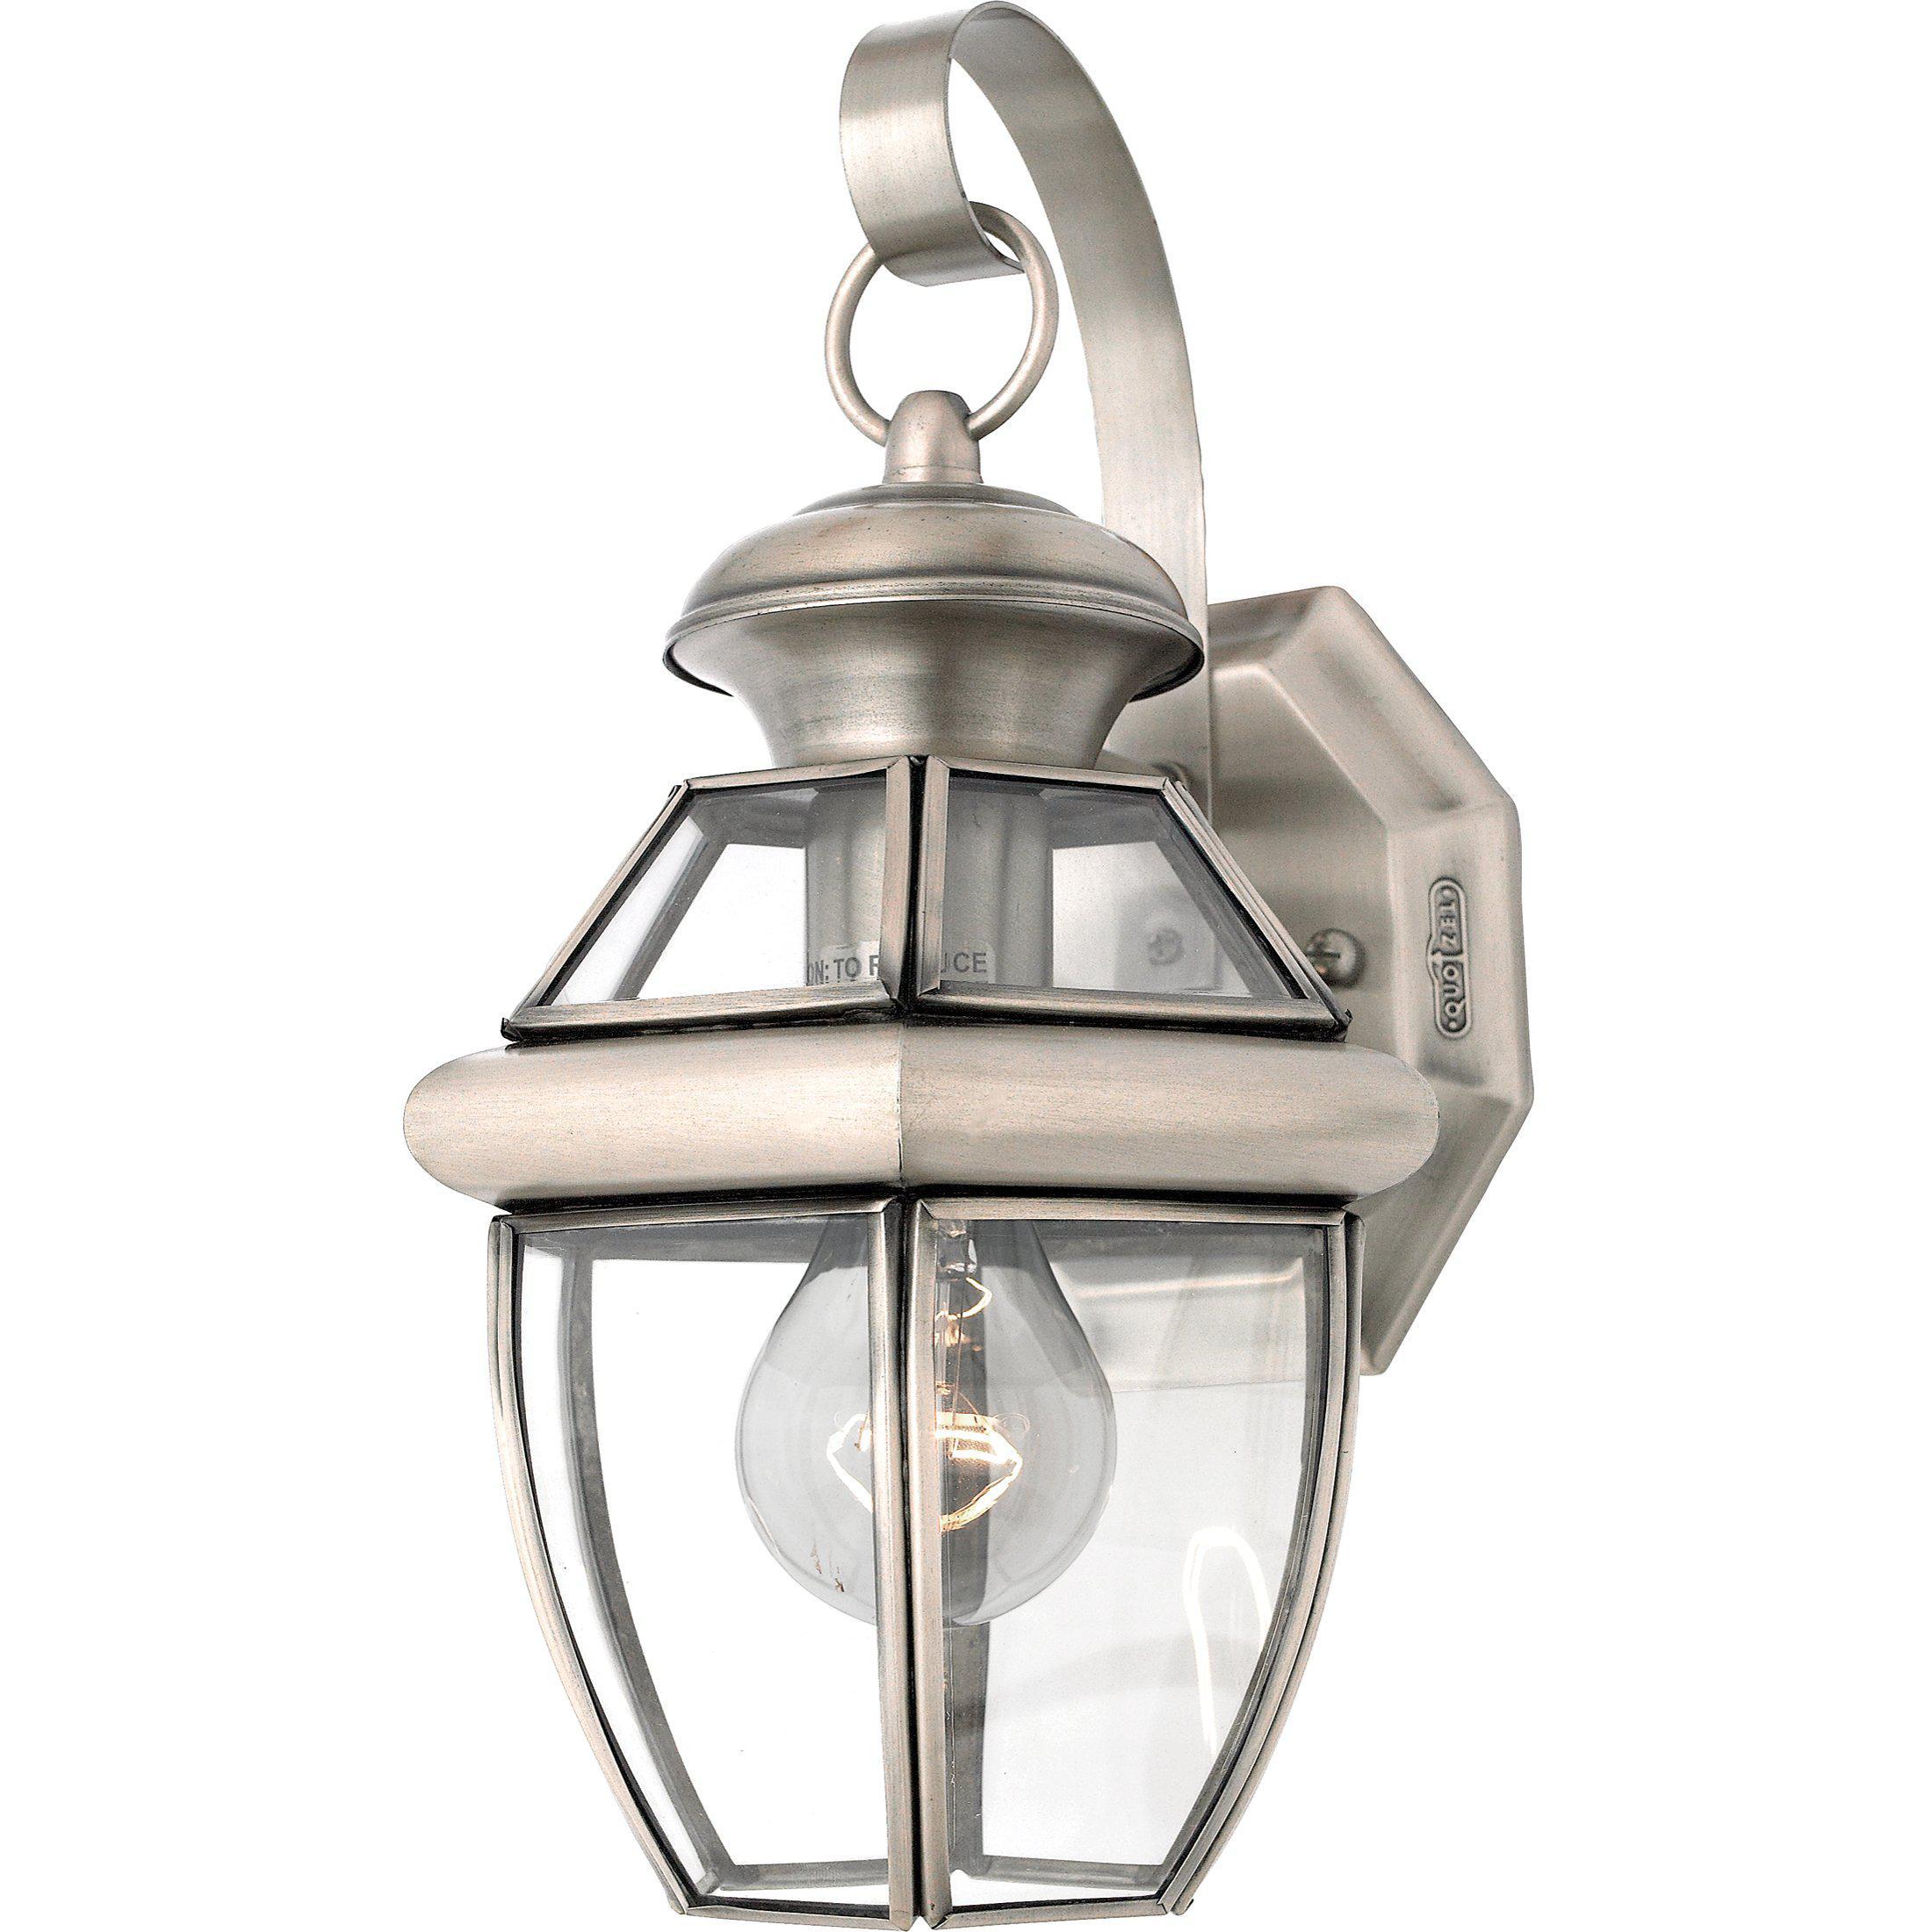 Quoizel  Newbury Outdoor Lantern, Small On-Sale Outdoor l Wall Quoizel Inc   